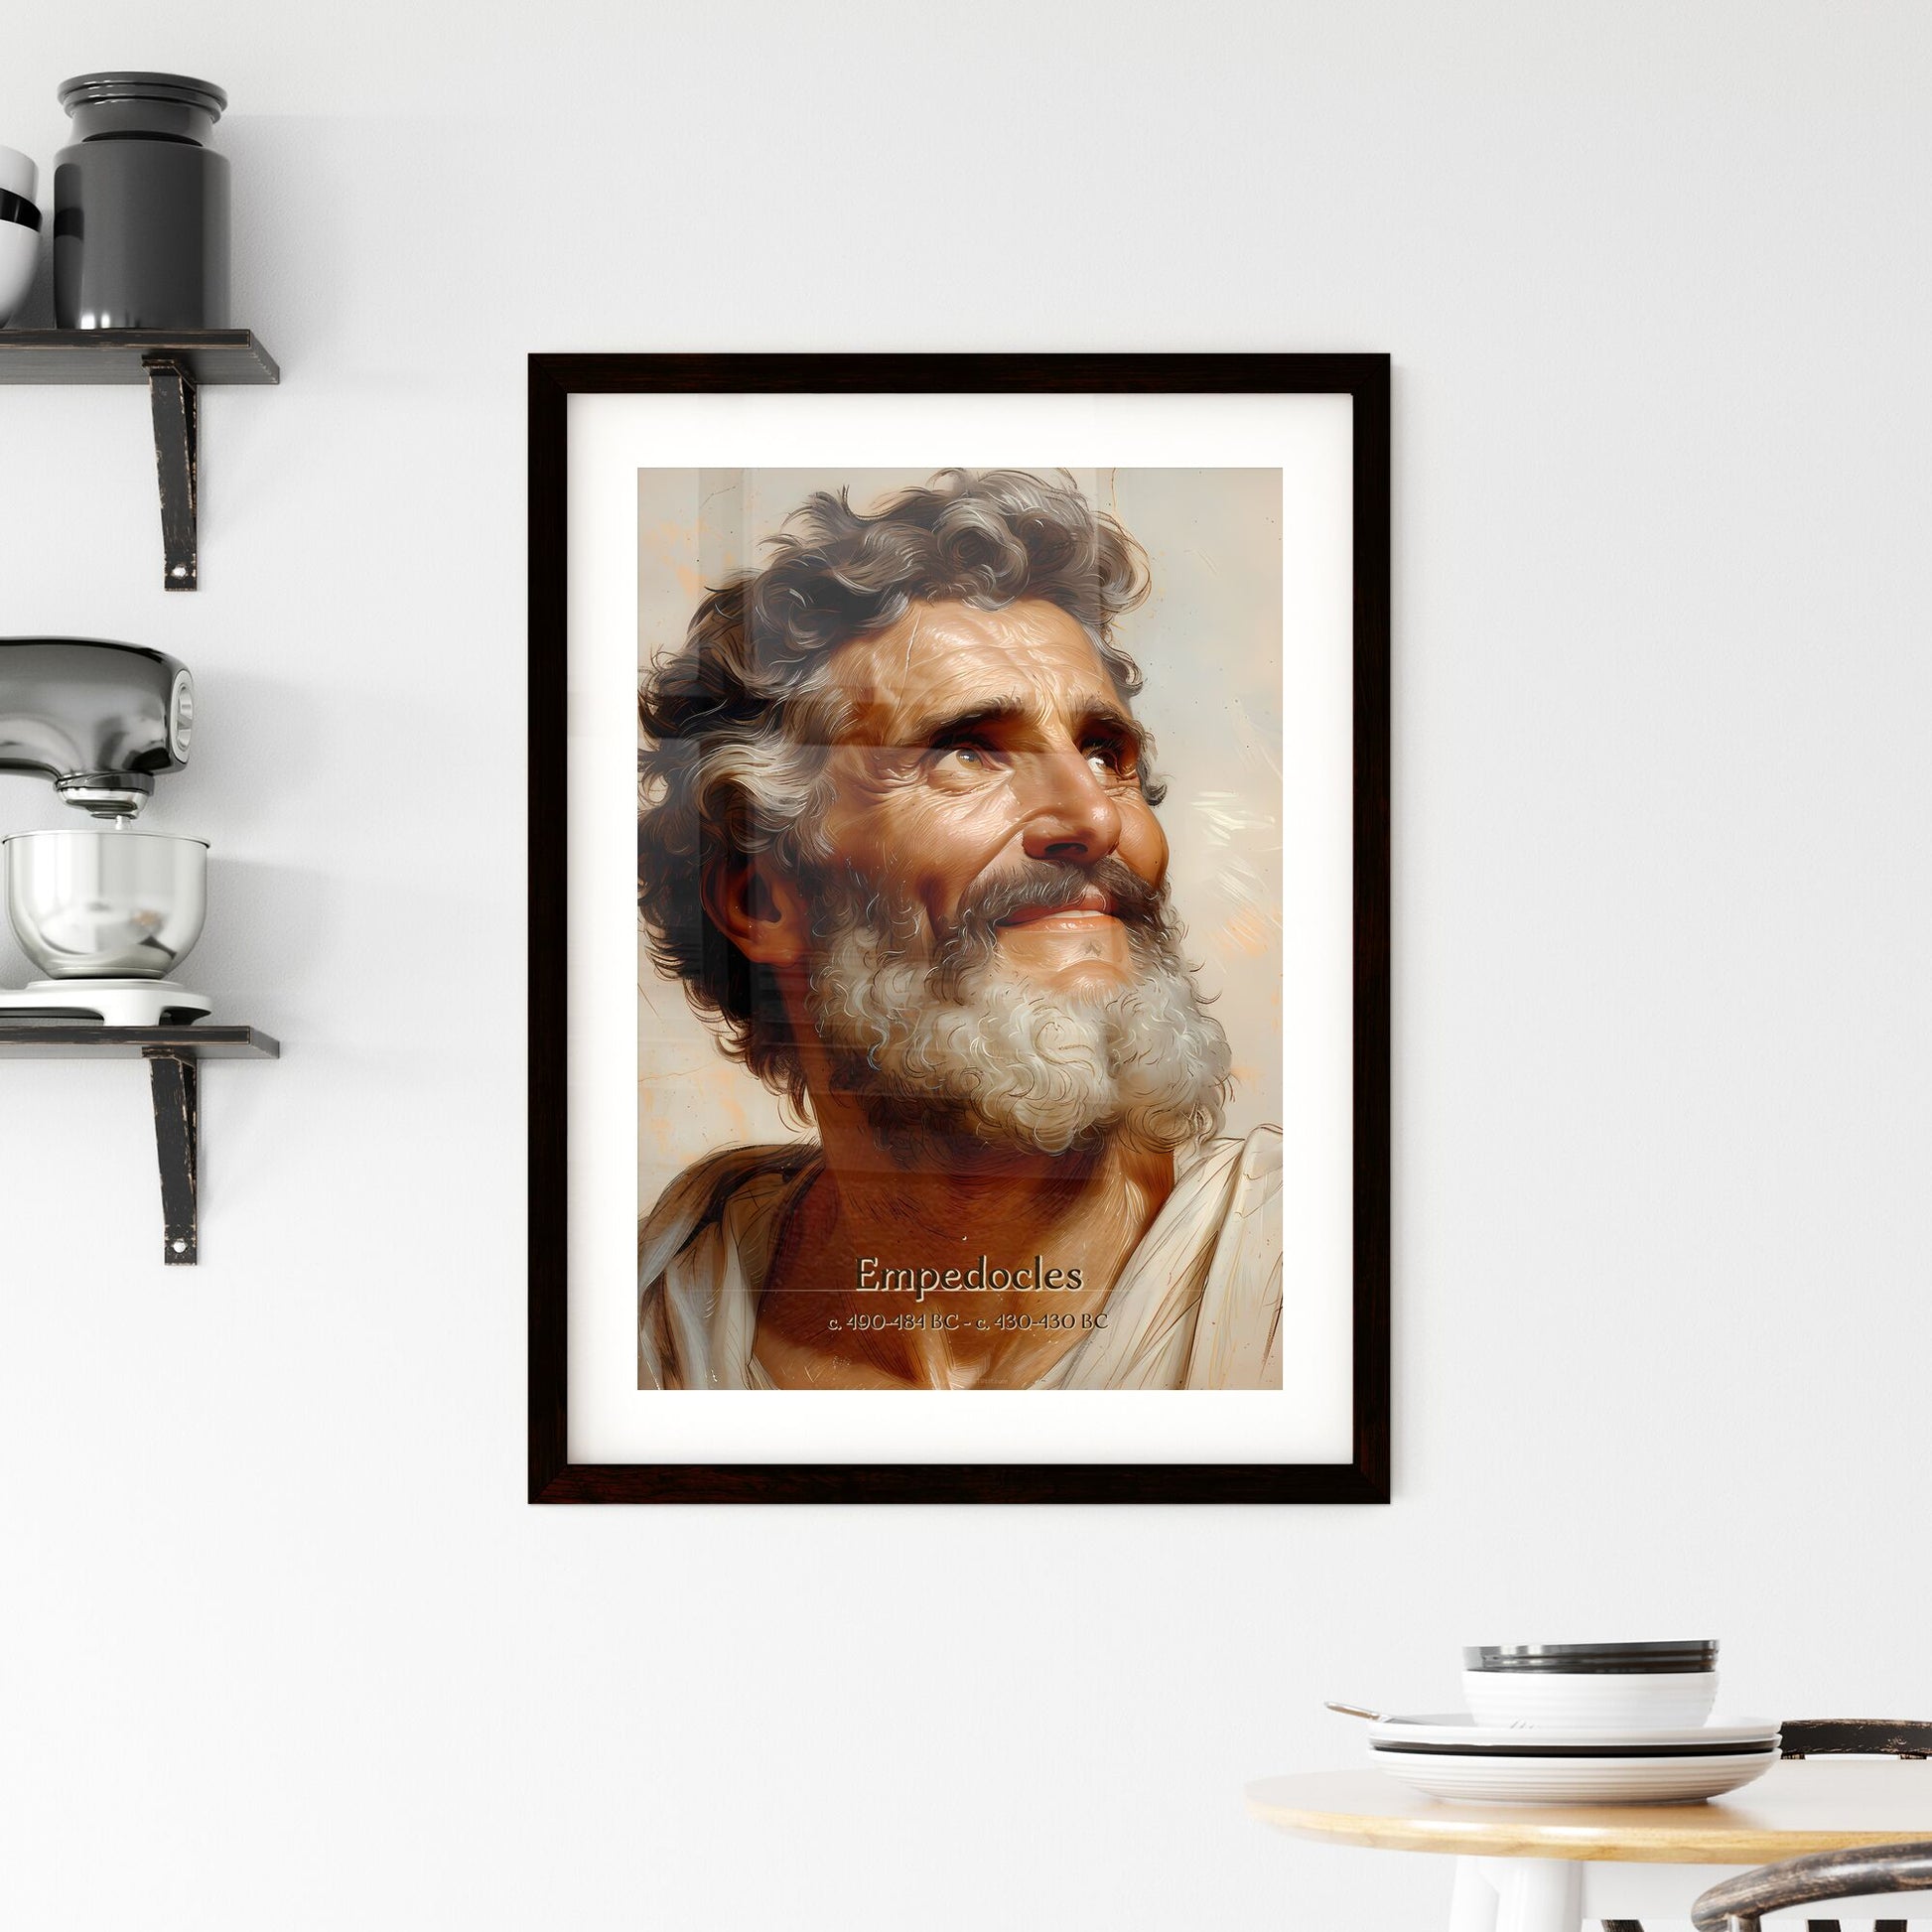 Empedocles, c. 490-484 BC - c. 430-430 BC, A Poster of a man with a beard looking up Default Title